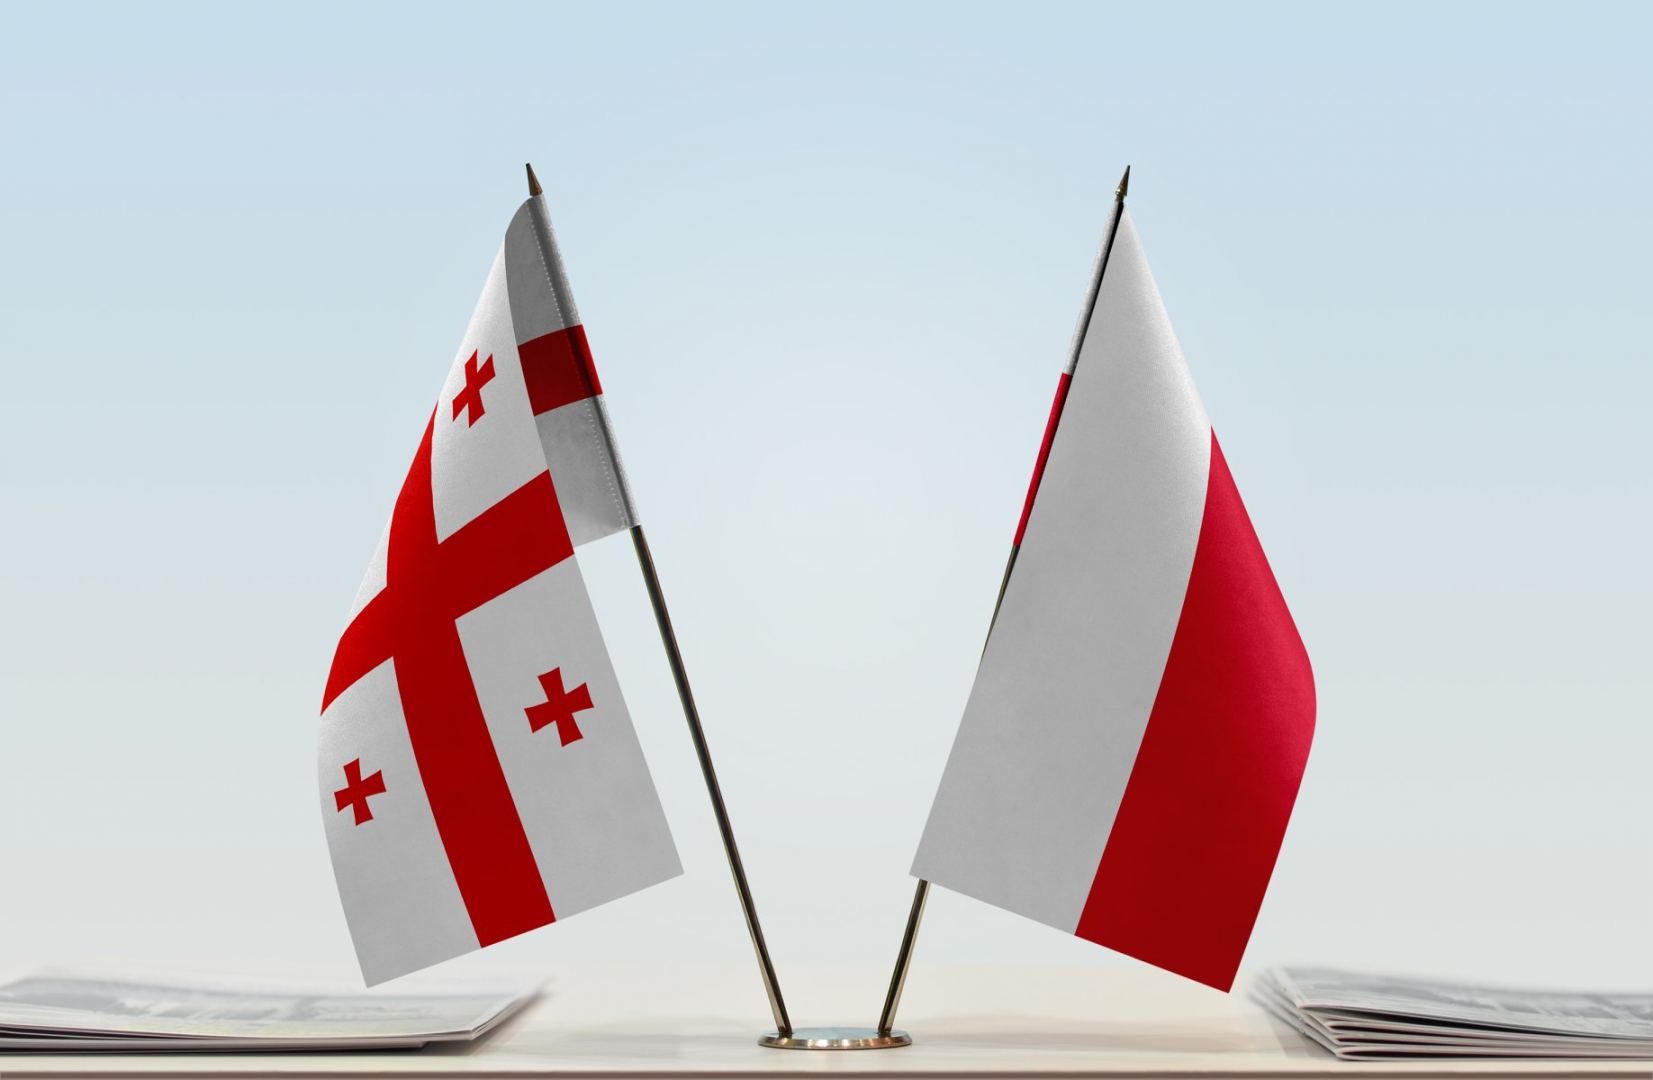 Georgia and Poland have potential for development of bilateral trade